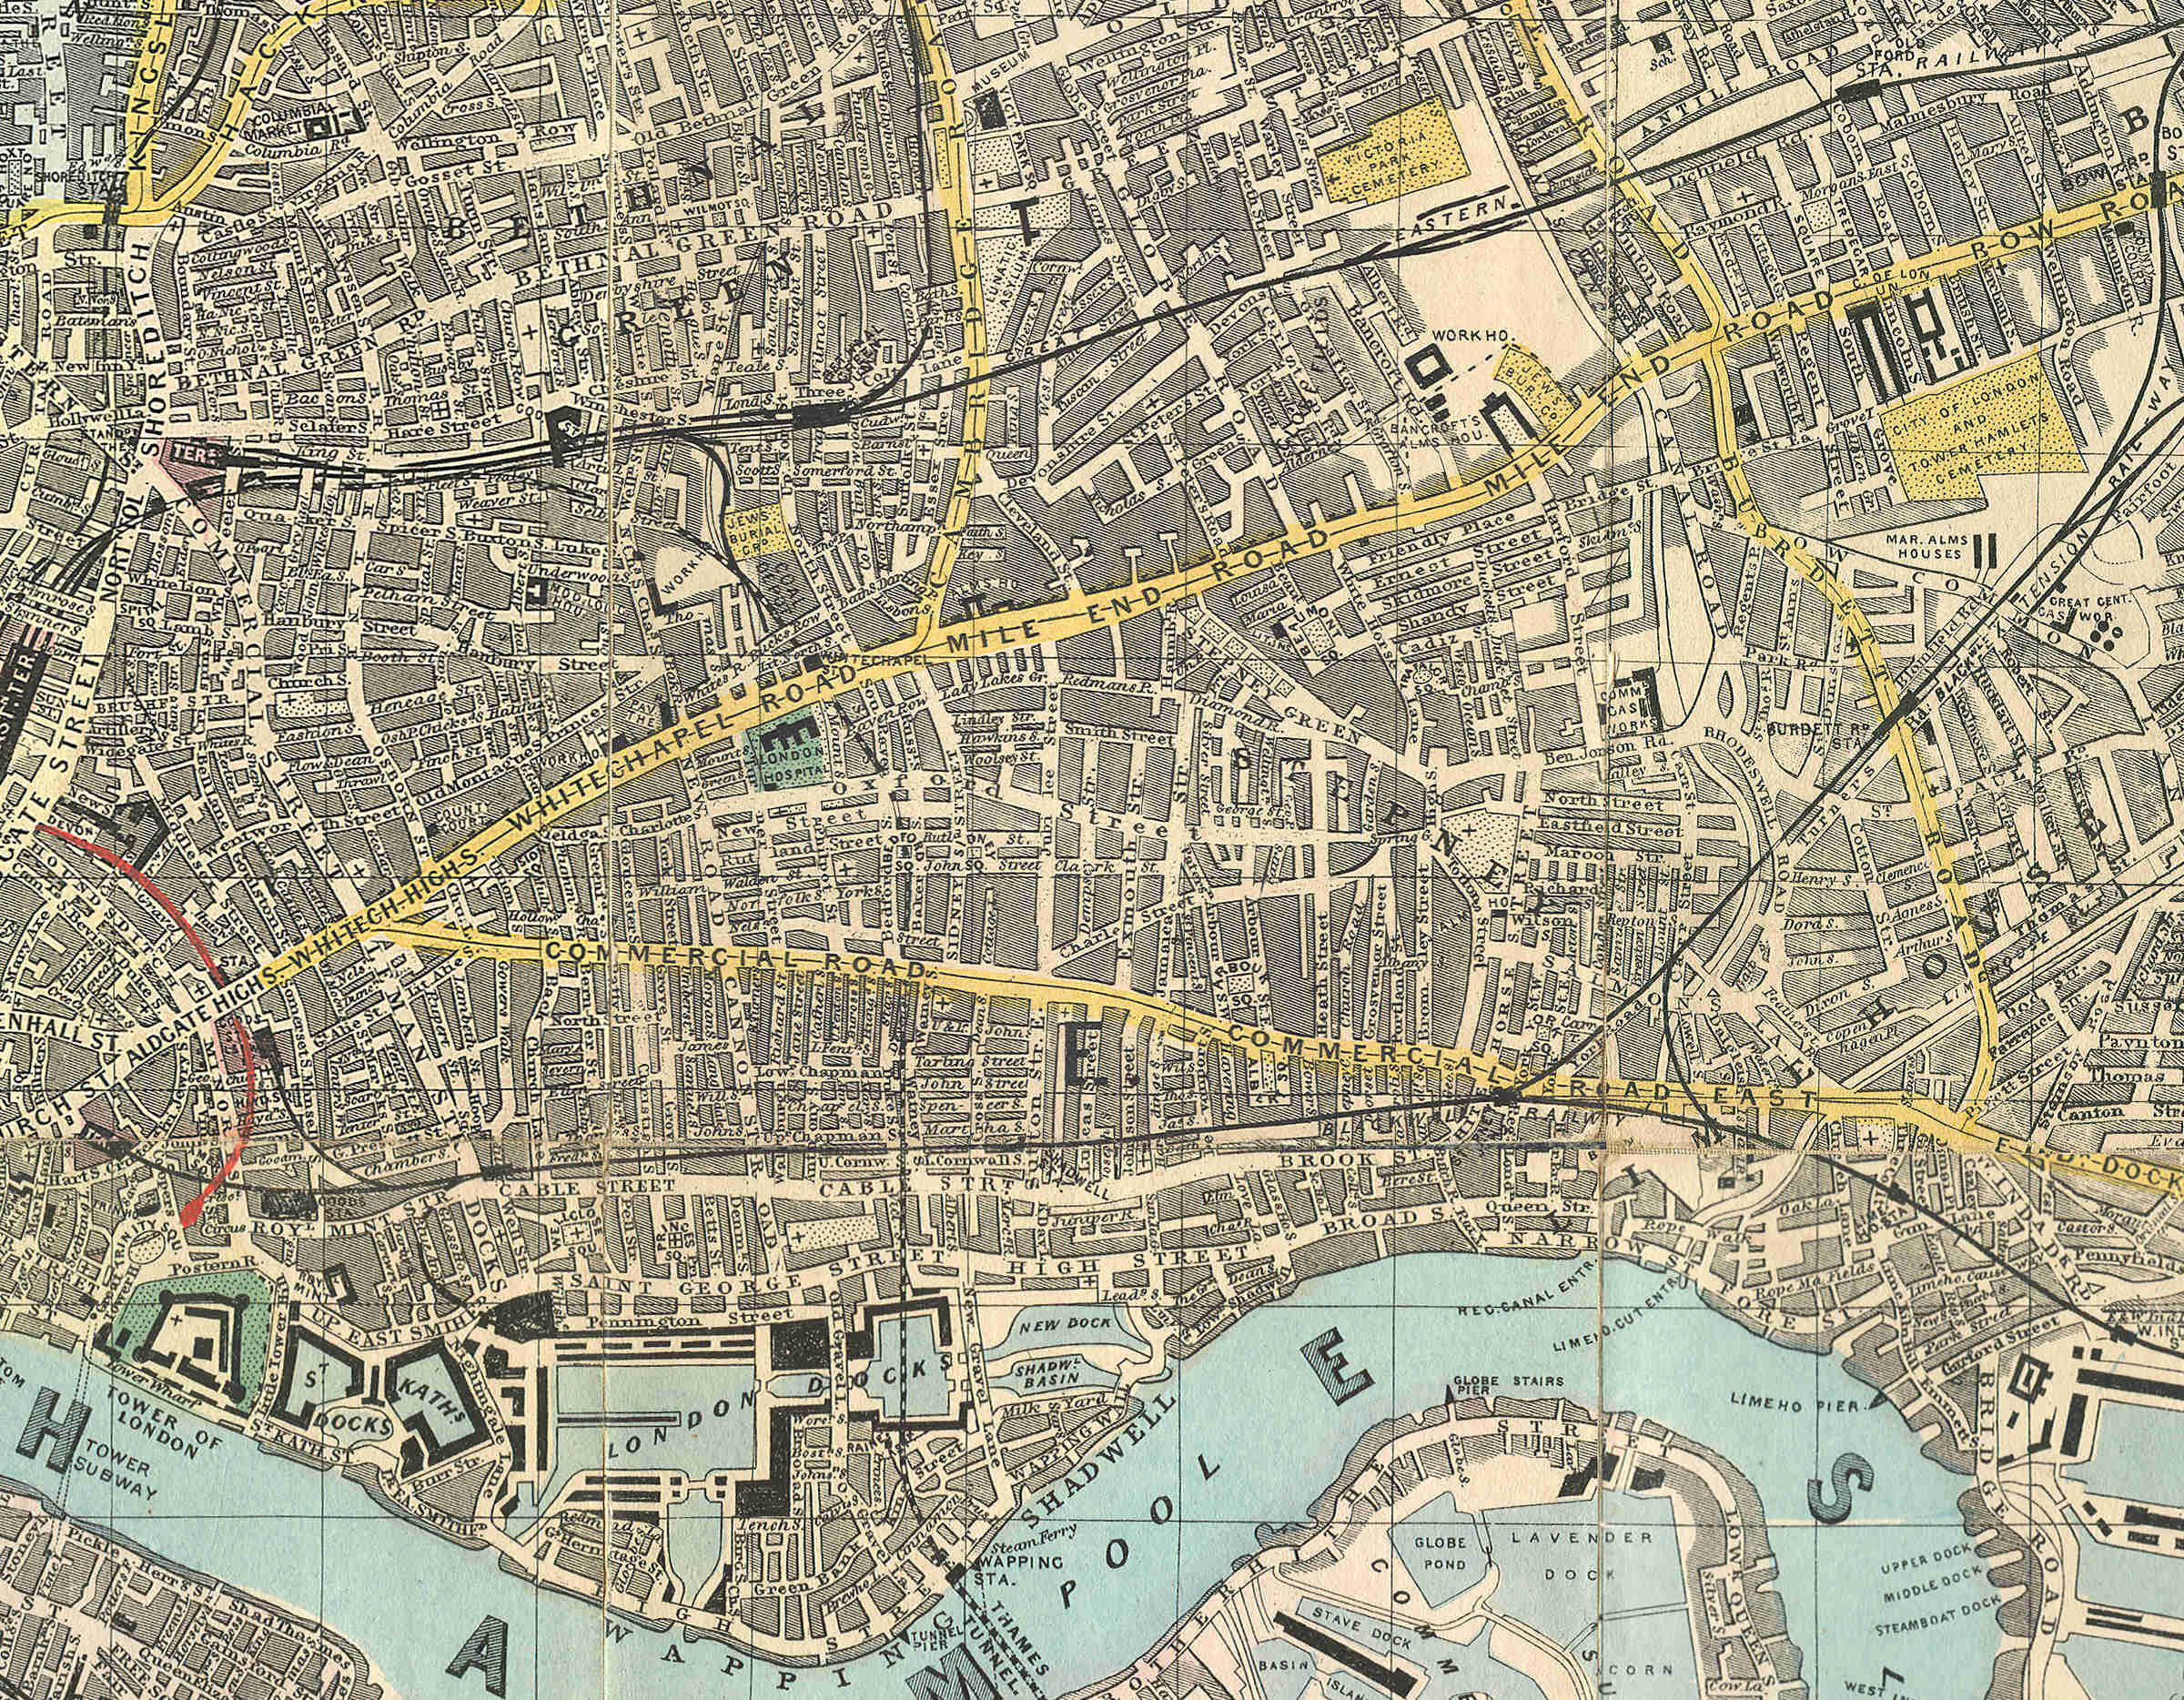 1882 - Reynolds', "London and its Suburbs"